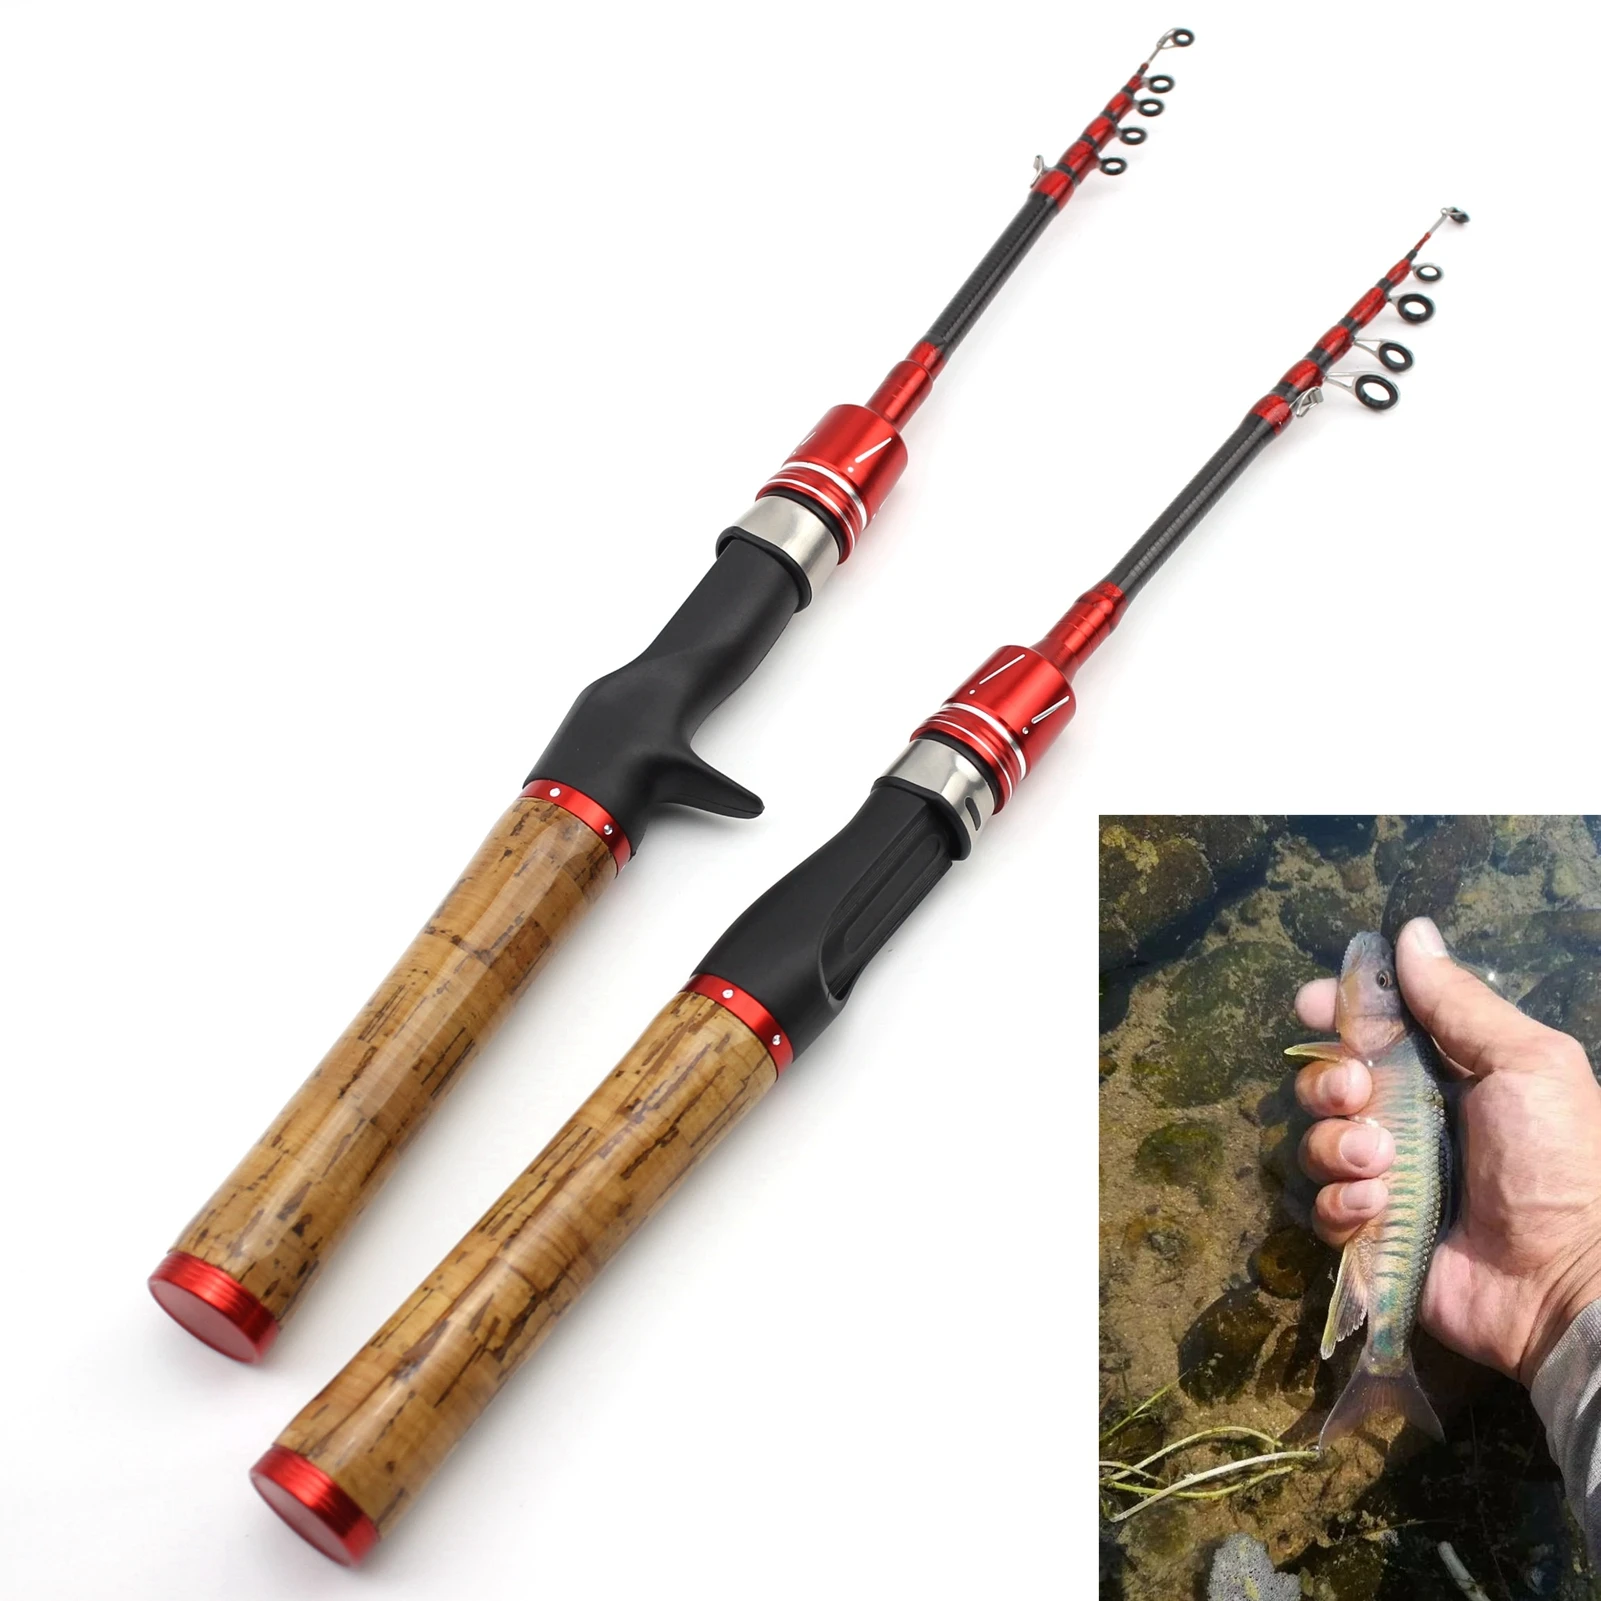 1.8M ul power Telescopic Spinning  Fishing Rod Lure Weight 1-5g Children beginners Catch small fish pole so soft slow rod pesca images - 6